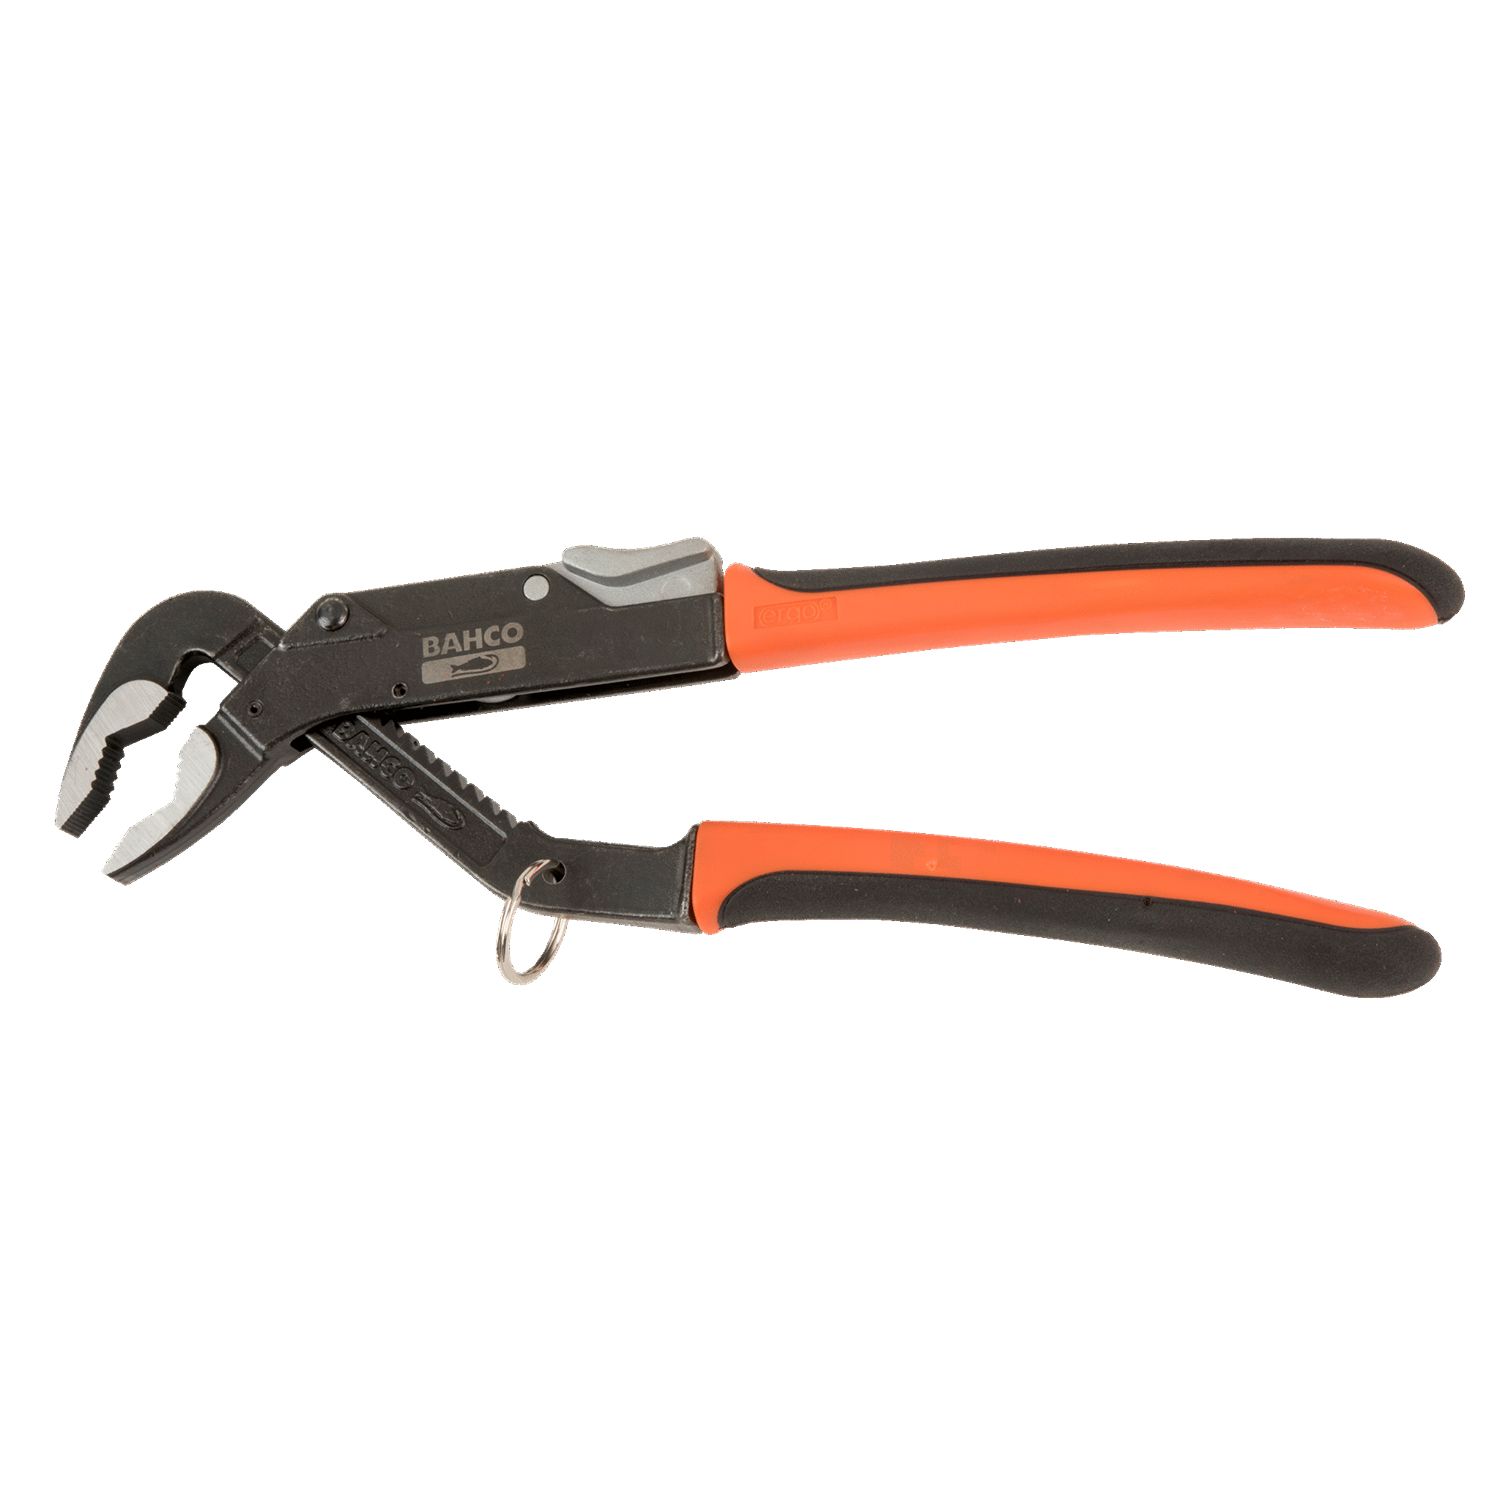 BAHCO TAH8224 ERGO Waterpump Plier with Safety Ring (BAHCO Tools) - Premium Waterpump Plier from BAHCO - Shop now at Yew Aik.